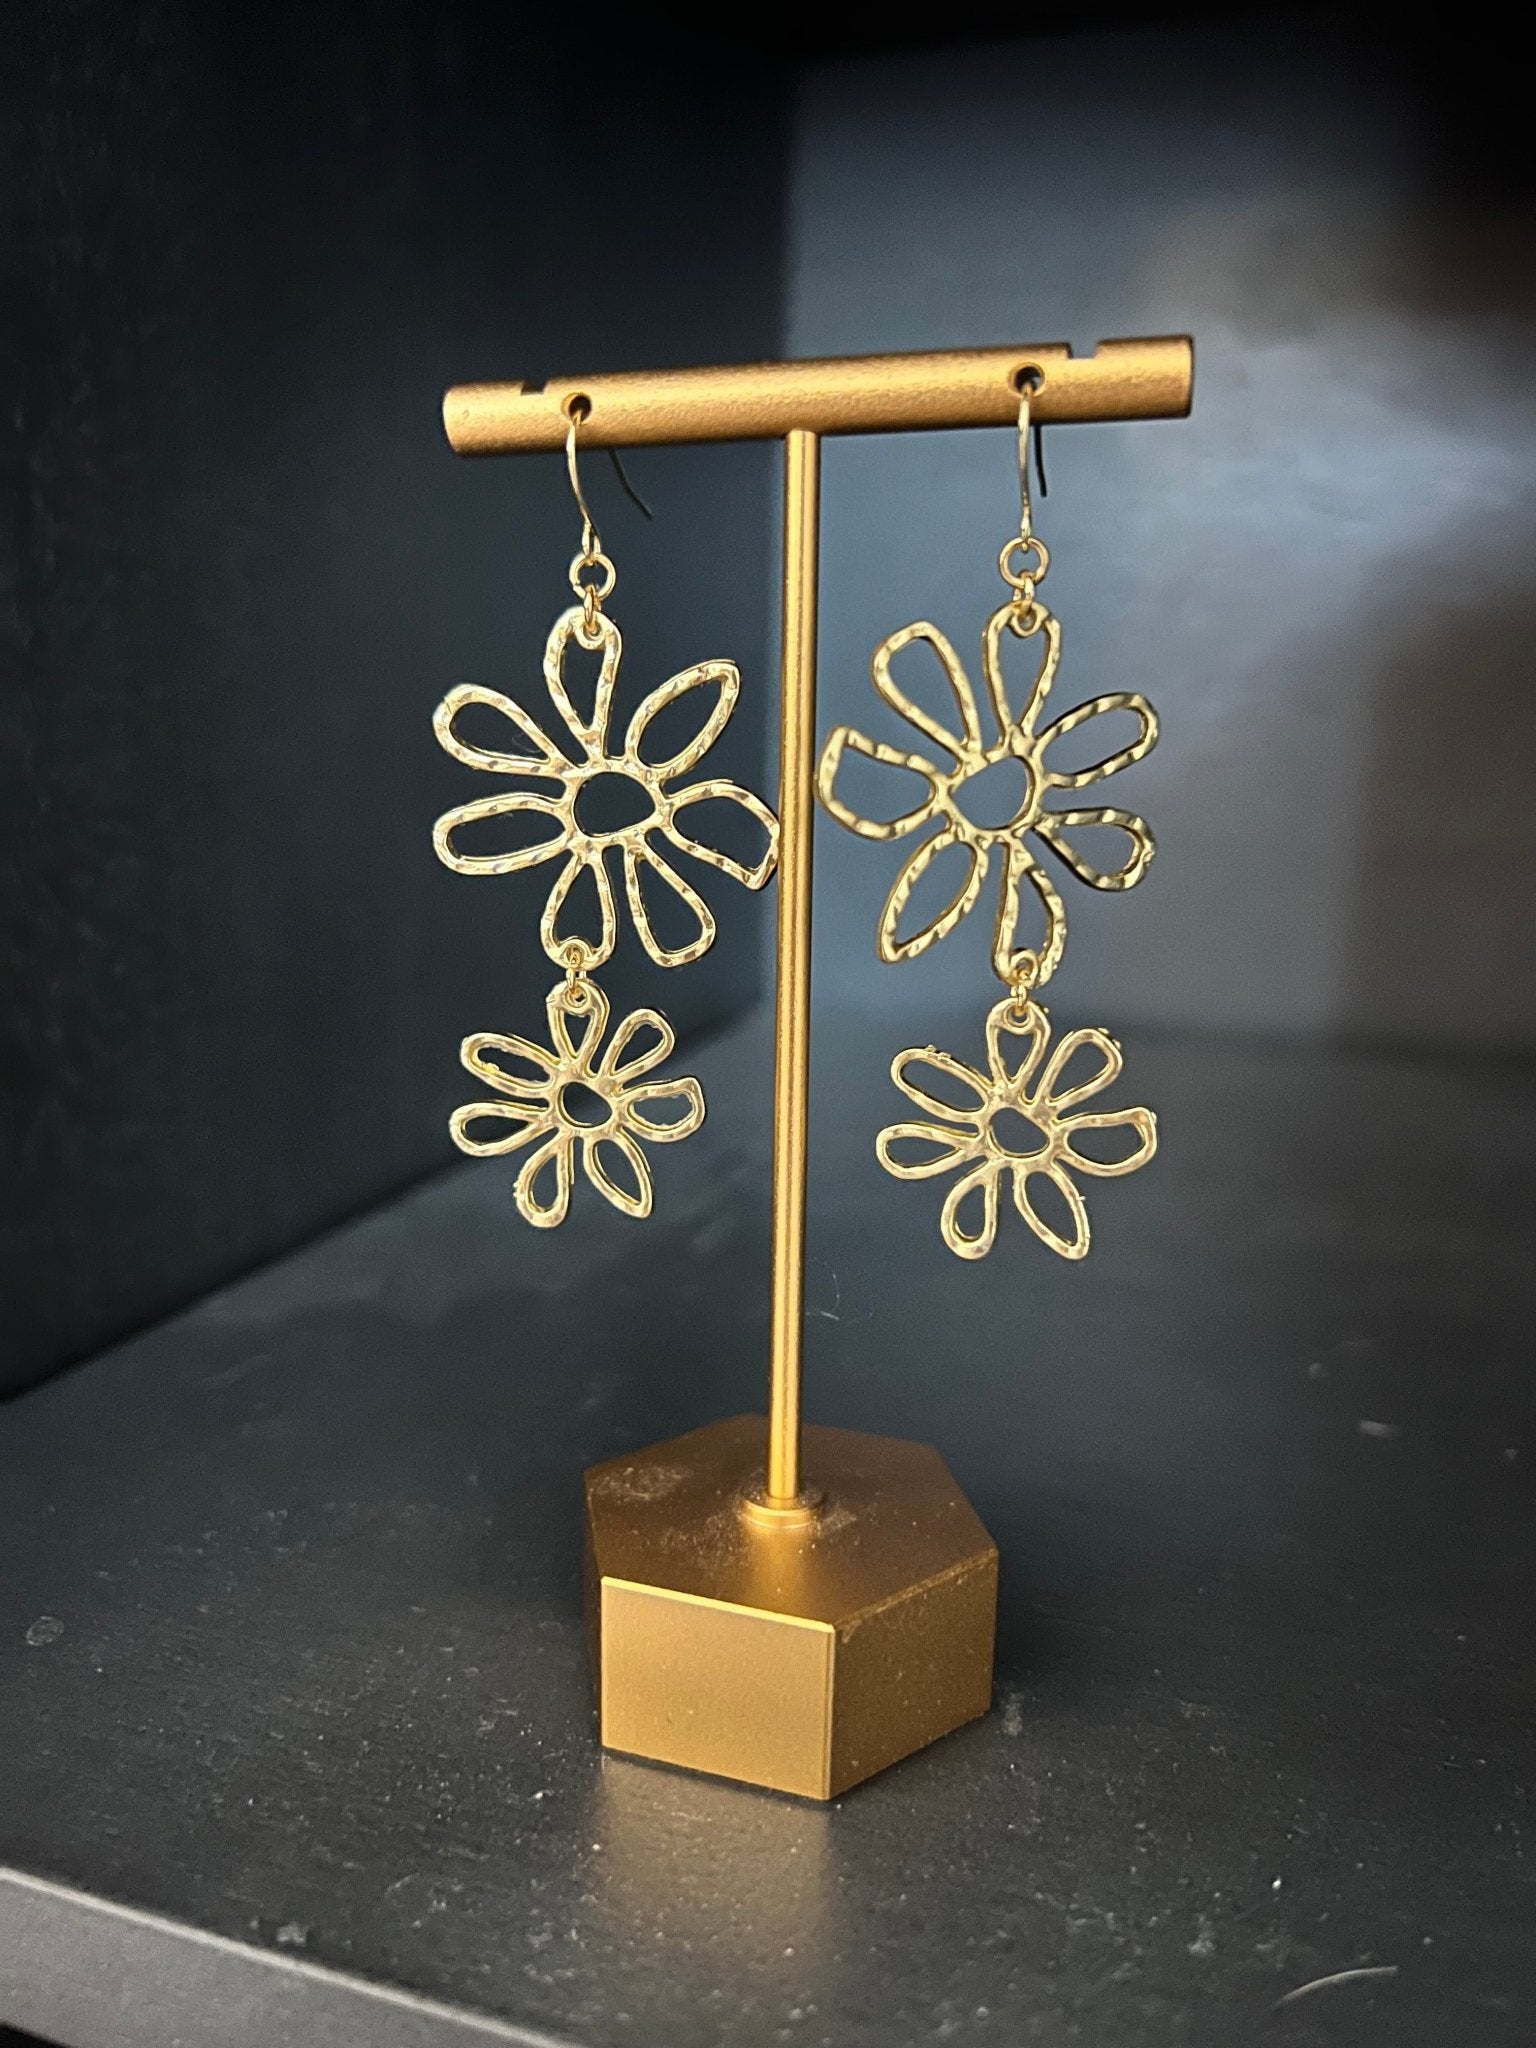 Gold flower stack earrings - Saints Place Designs